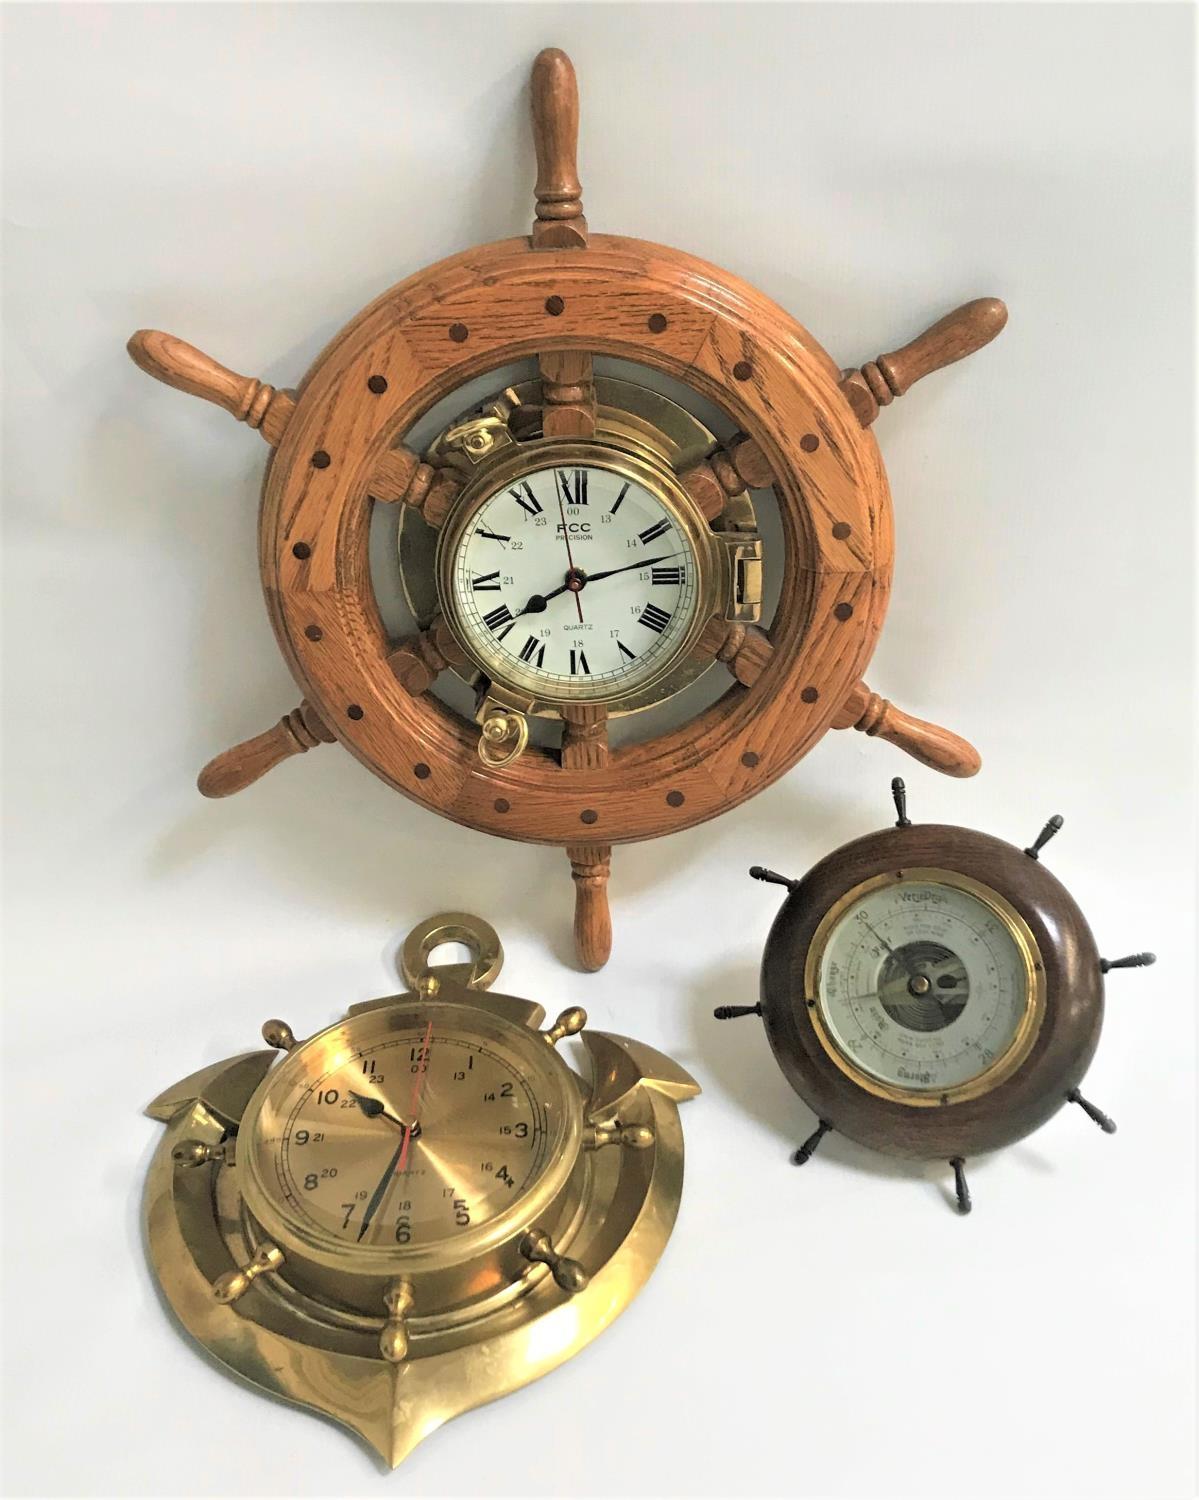 TWO NAUTICAL THEMED WALL CLOCKS AND A SIMILAR BAROMETER one clock by FCC Precision with circular